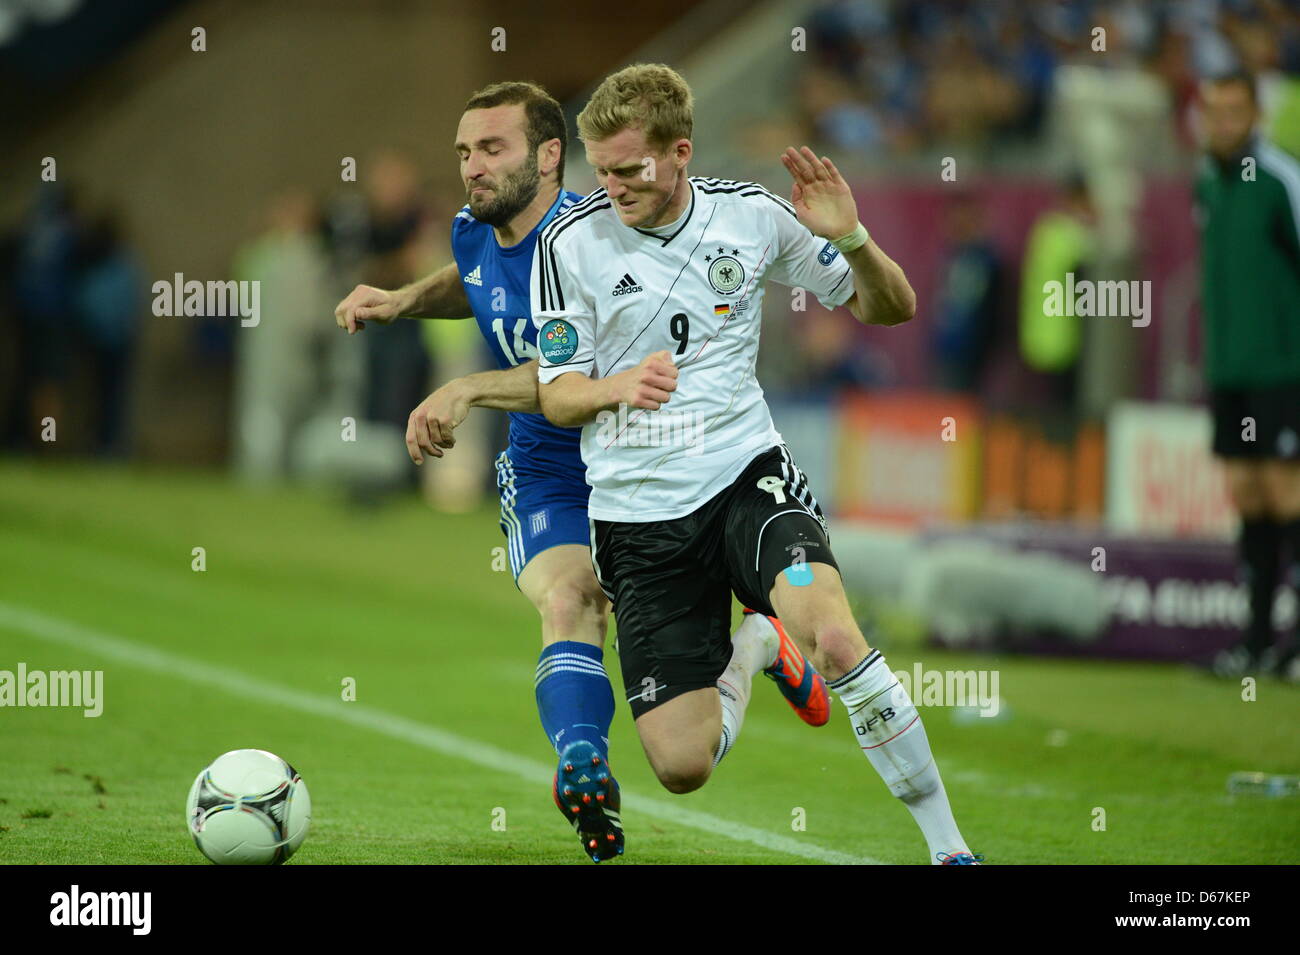 Germany's Andre Schuerrle (R) and Greece's Dimitris Salpingidis vie for the ball during UEFA EURO 2012 quarter-final soccer match Germany vs Greece at Arena Gdansk in Gdansk, Poland, 22 June 2012. Photo: Andreas Gebert dpa (Please refer to chapters 7 and 8 of http://dpaq.de/Ziovh for UEFA Euro 2012 Terms & Conditions) Stock Photo